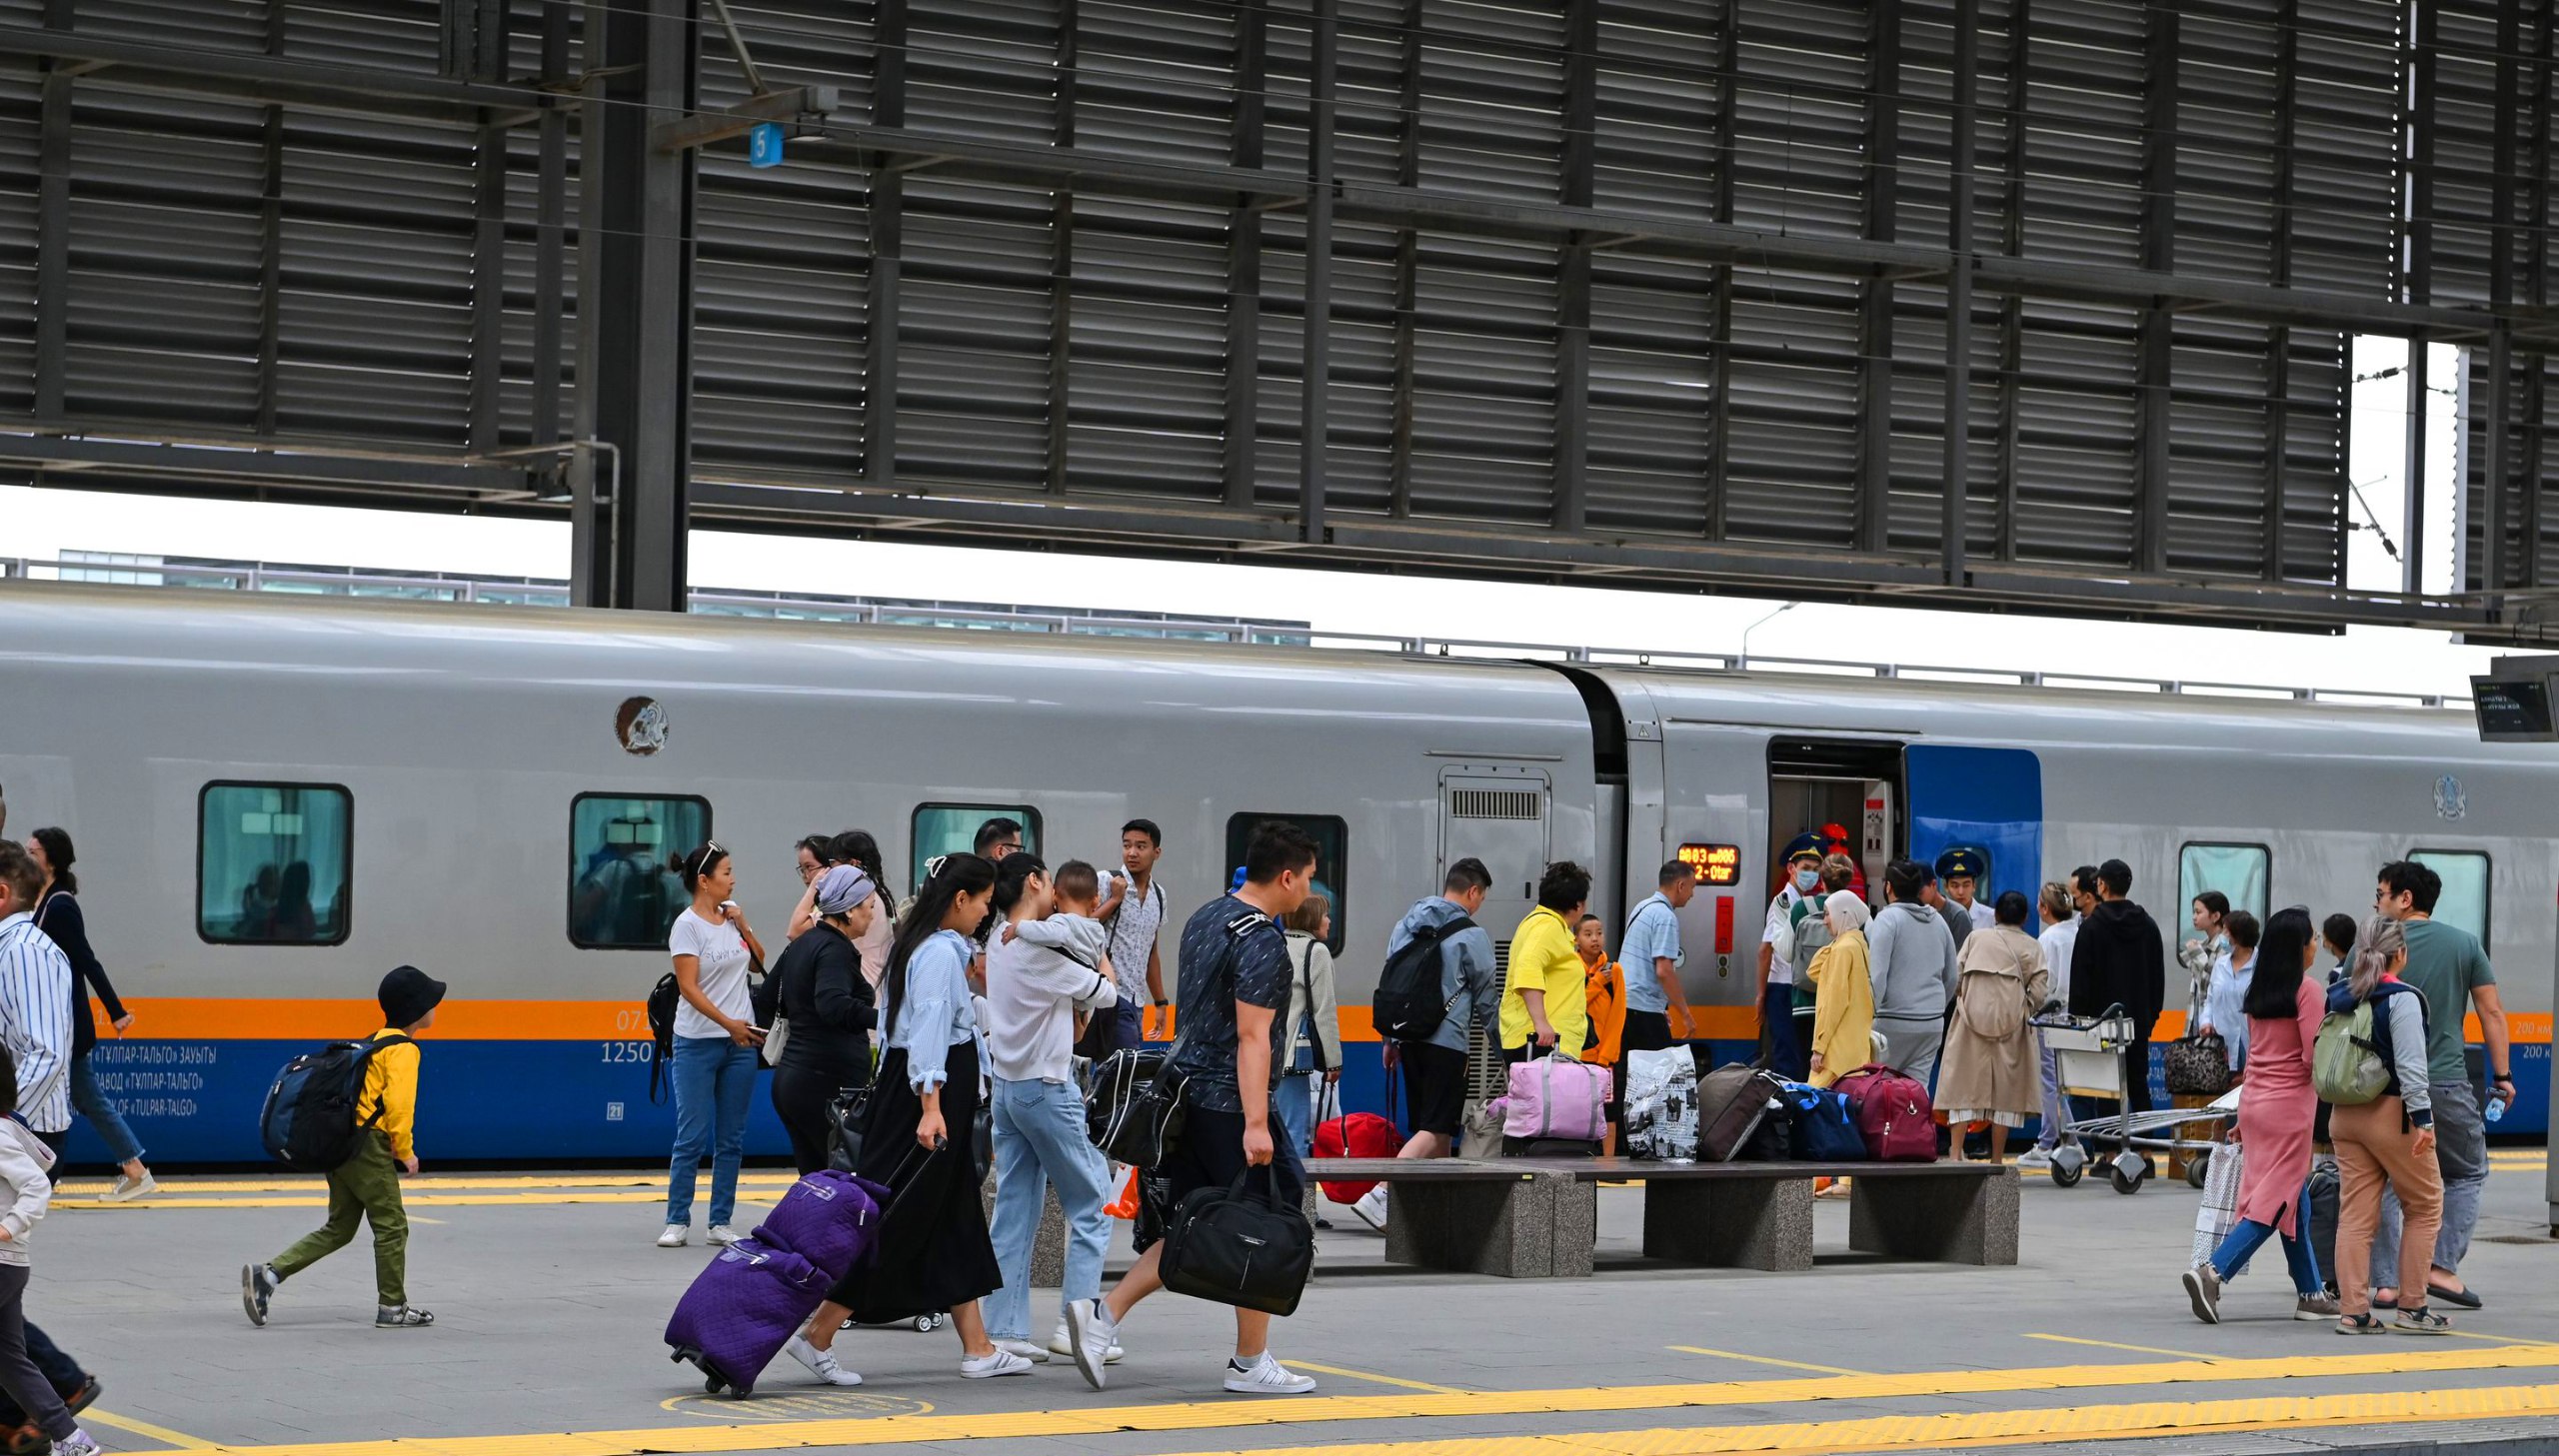 Baggage rules on passenger trains: what is important to know